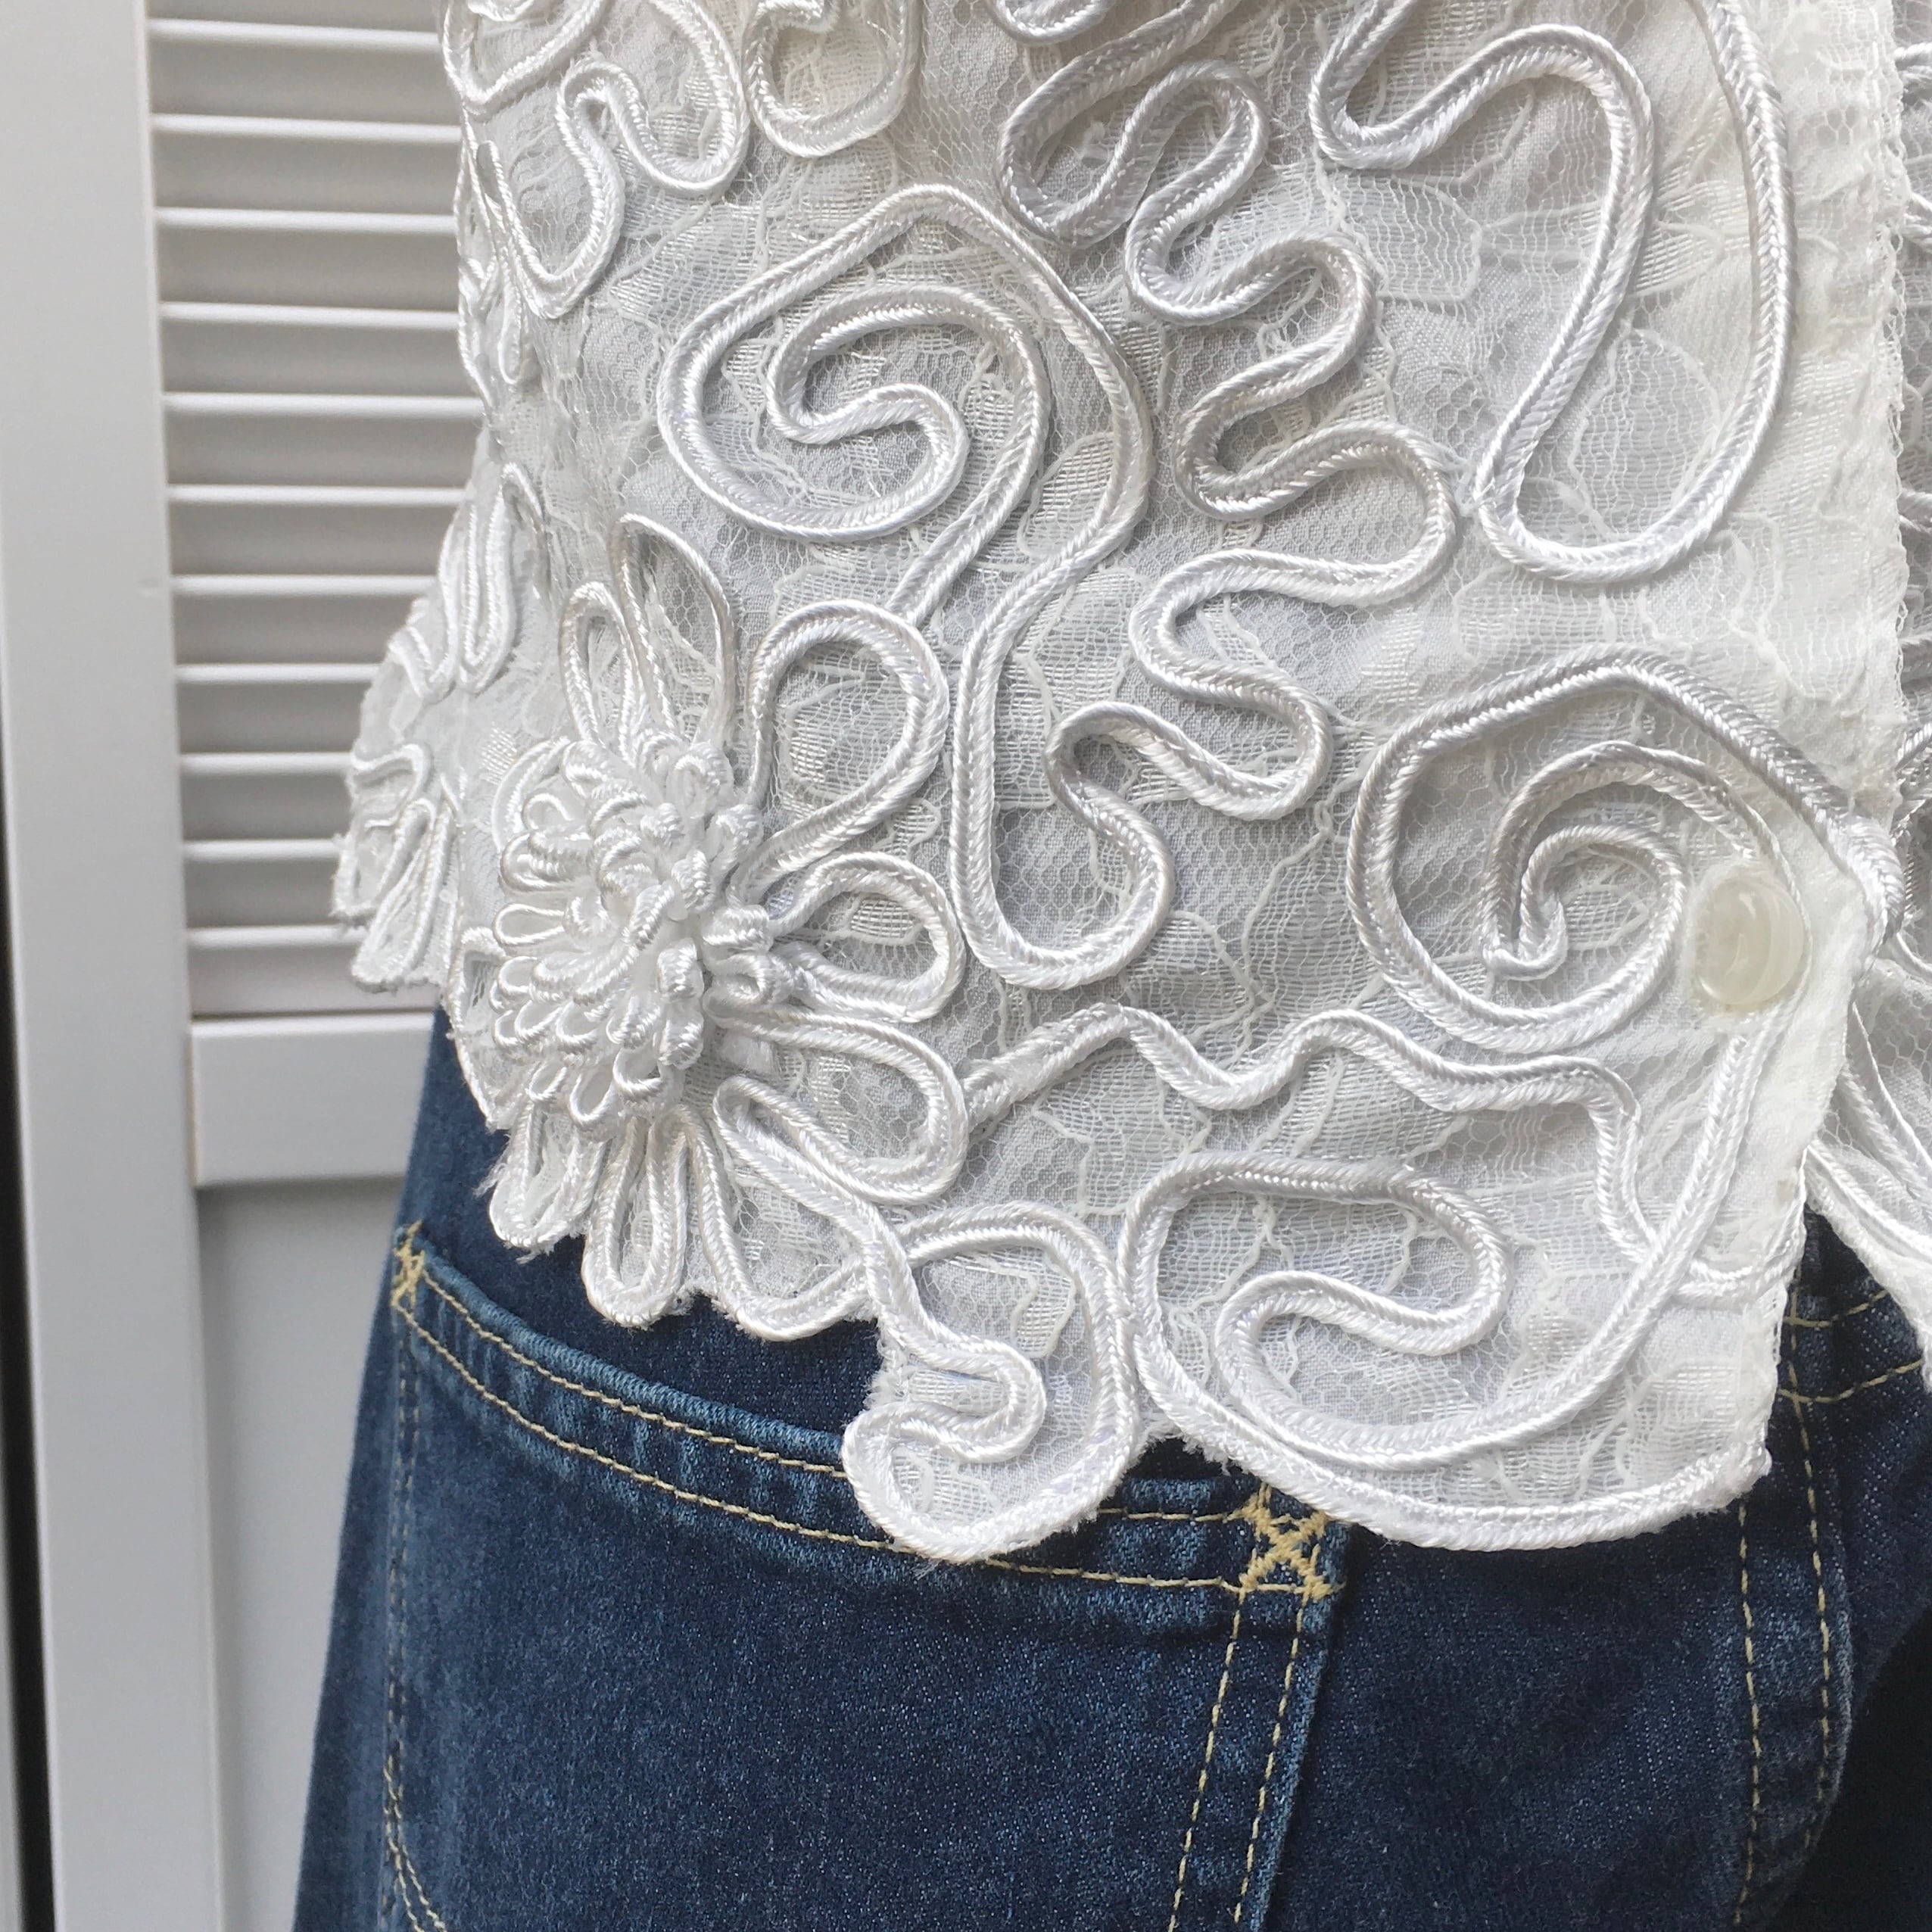 flower motif code embroidery lace tops 〈レトロ古着 フラワー